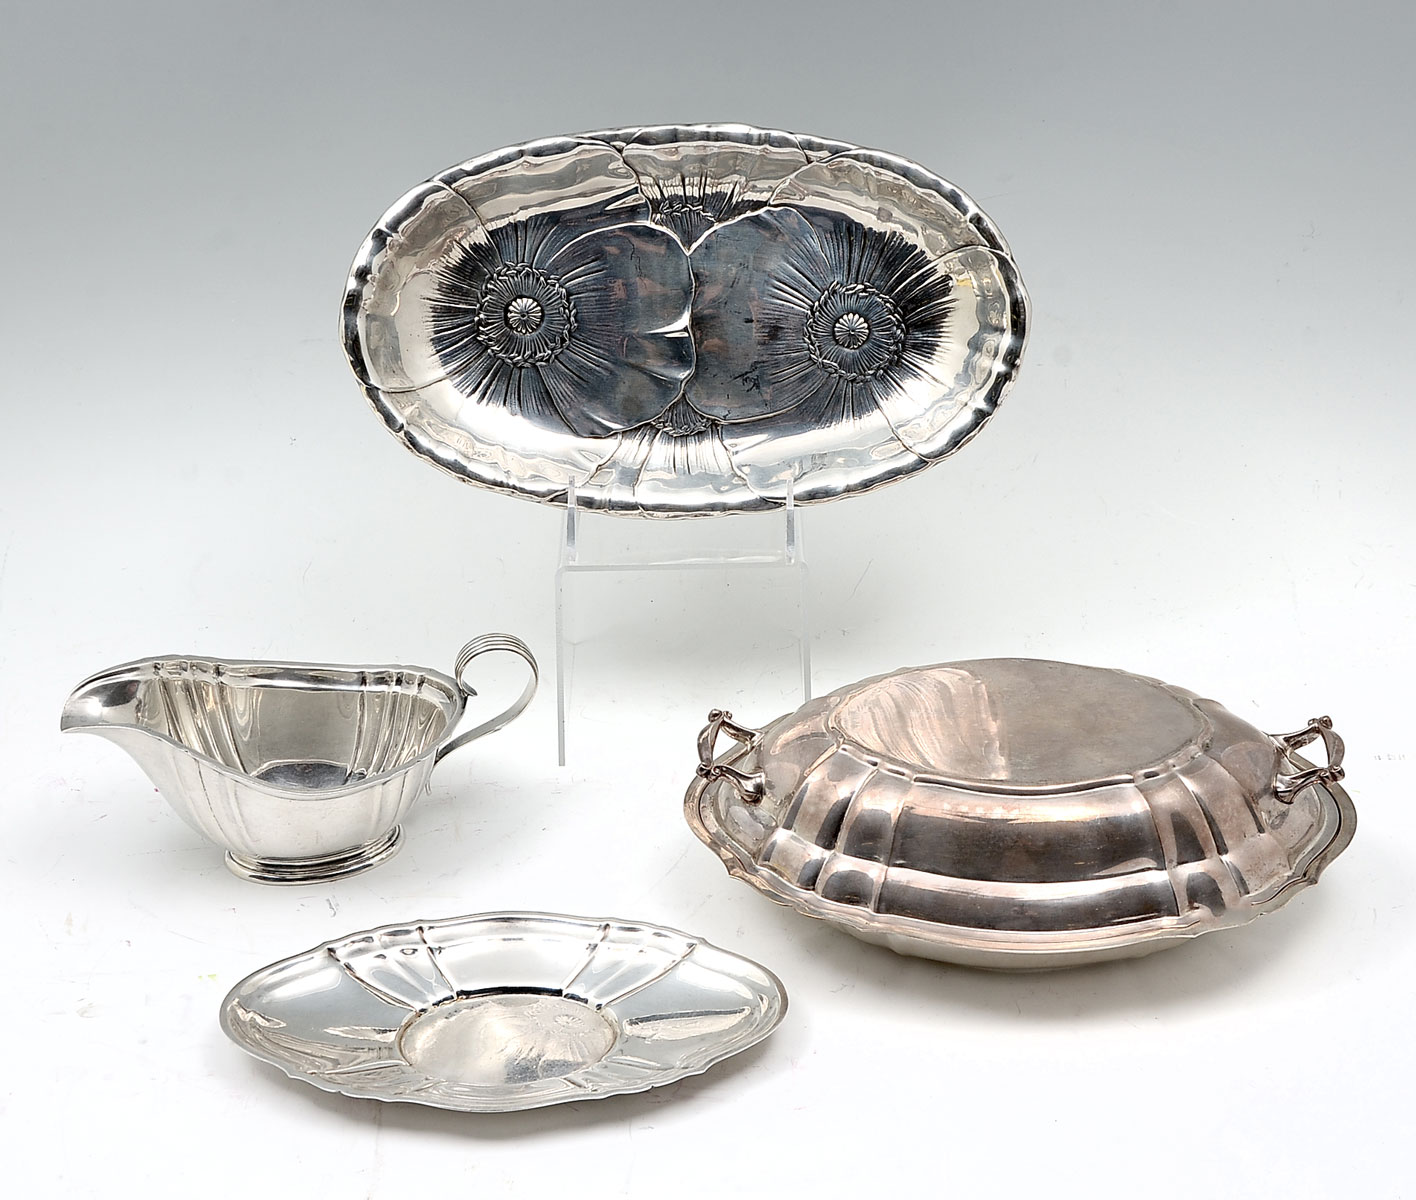 4 PC. ESTATE STERLING COLLECTION: